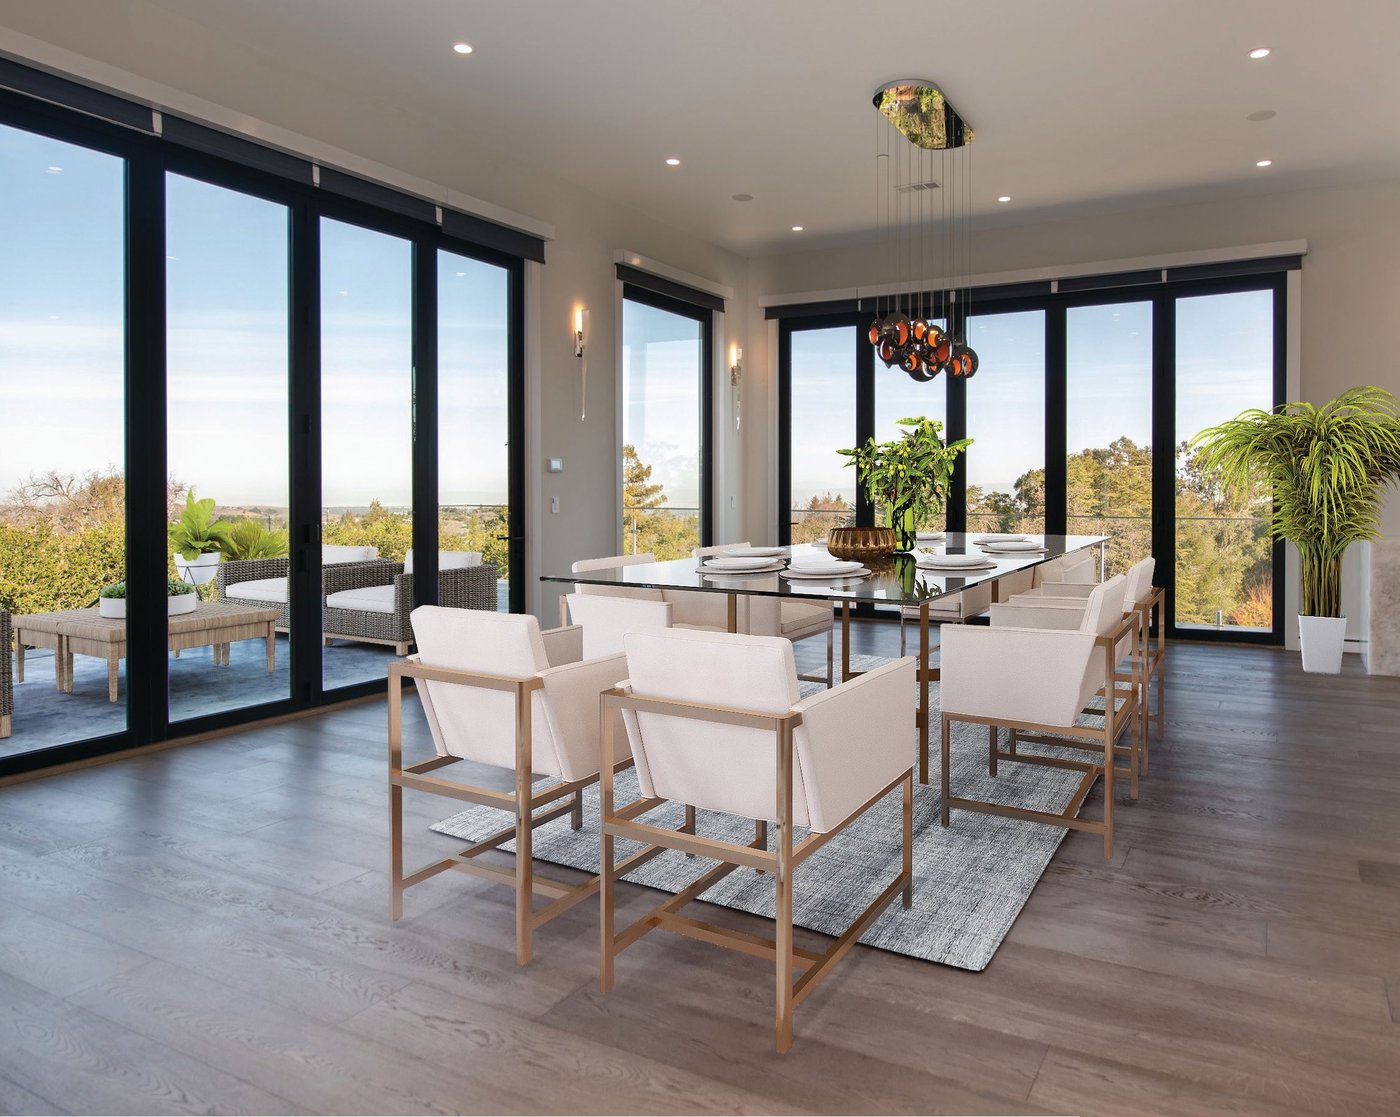 The outdoors flow in through large windows. PHOTO BY NATE DONOVAN/COURTESY OF GOLDEN GATE SOTHEBY’S INTERNATIONAL REALTY